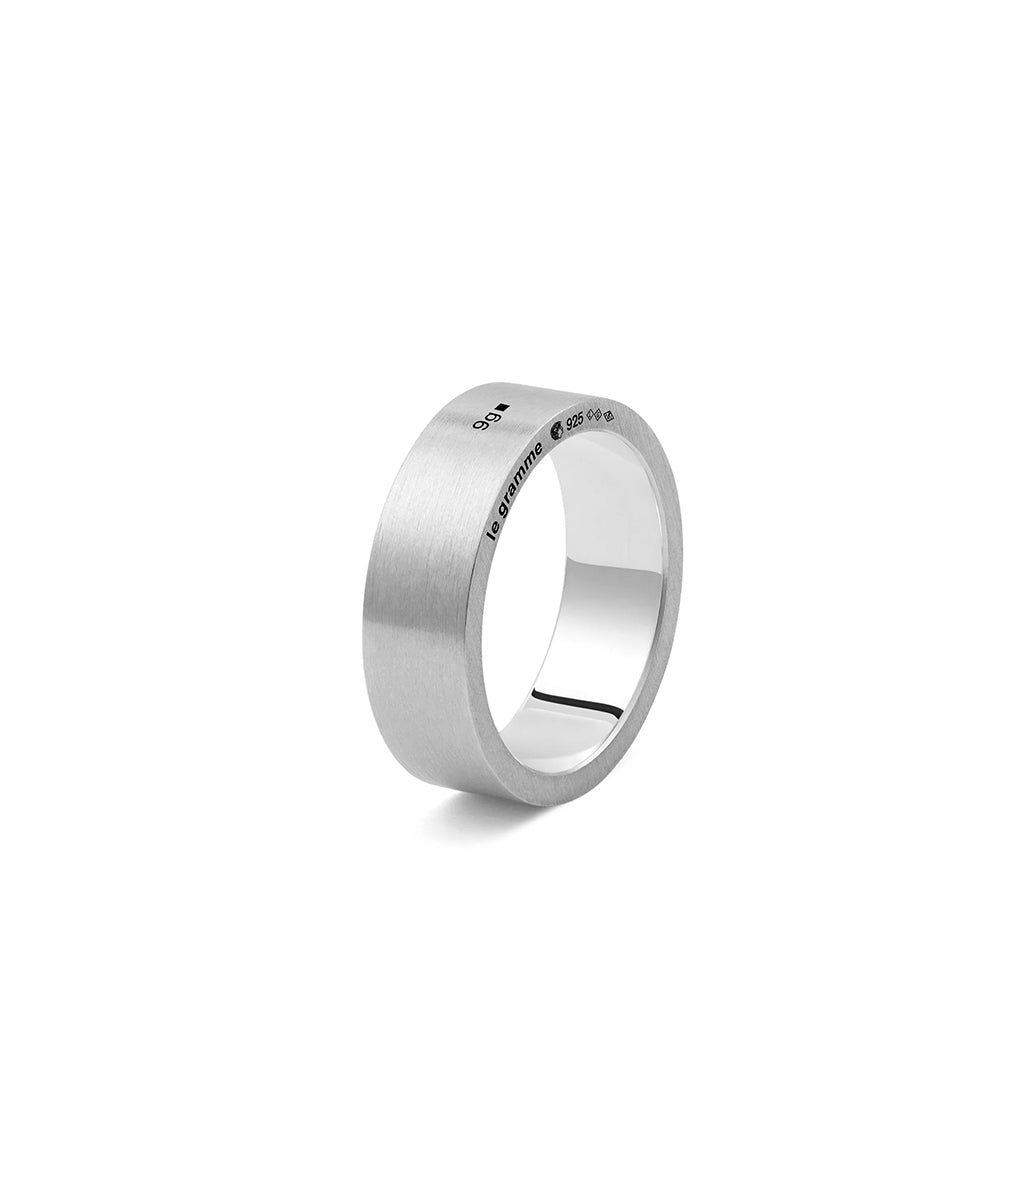 LE GRAMME "9G RIBBON RING BRUSHED"（NEW)